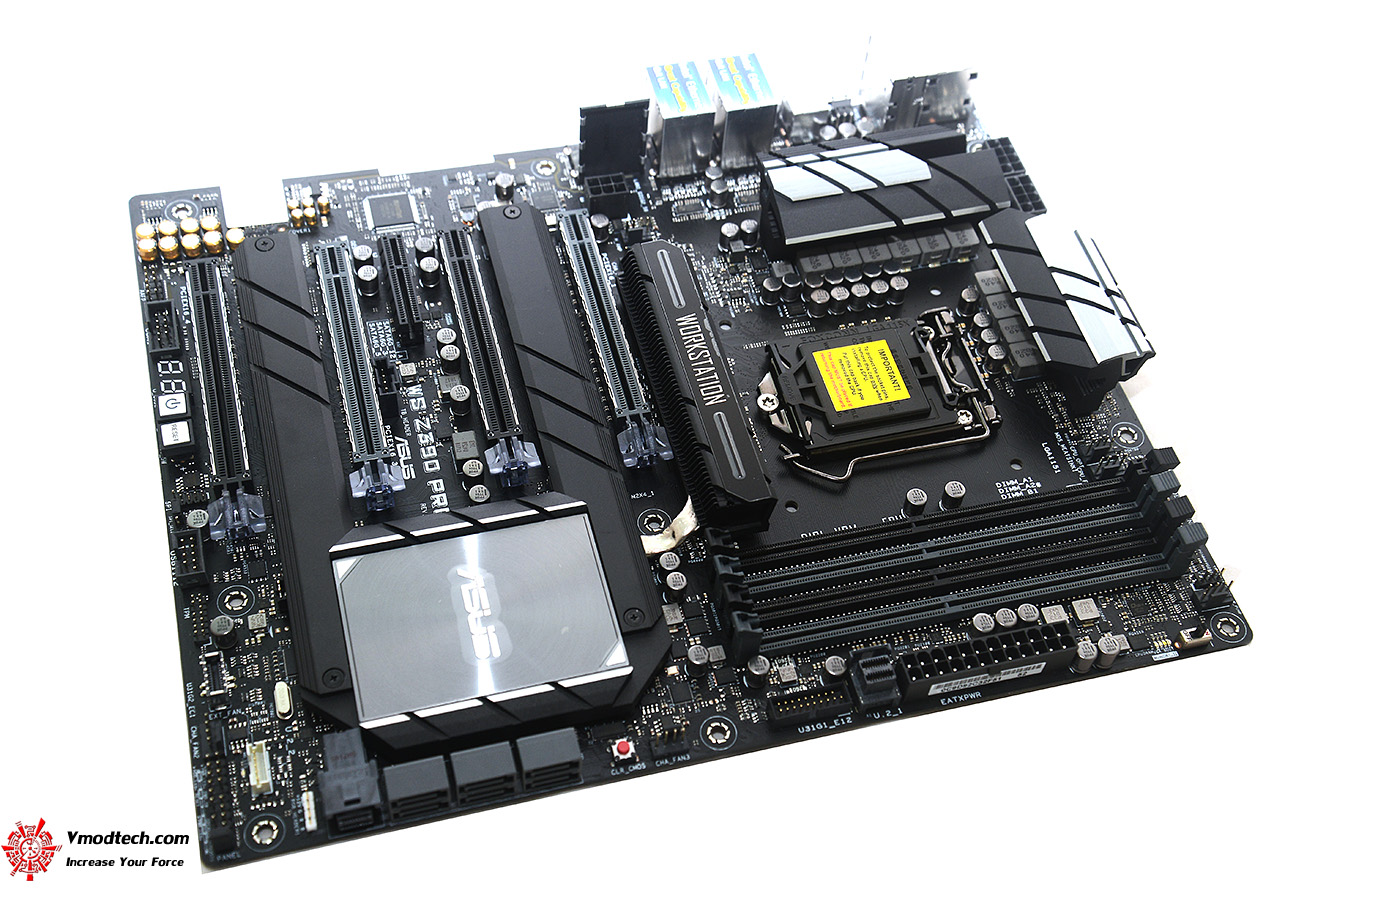 dsc 1298 ASUS WS Z390 PRO Servers & Workstations Motherboard Review